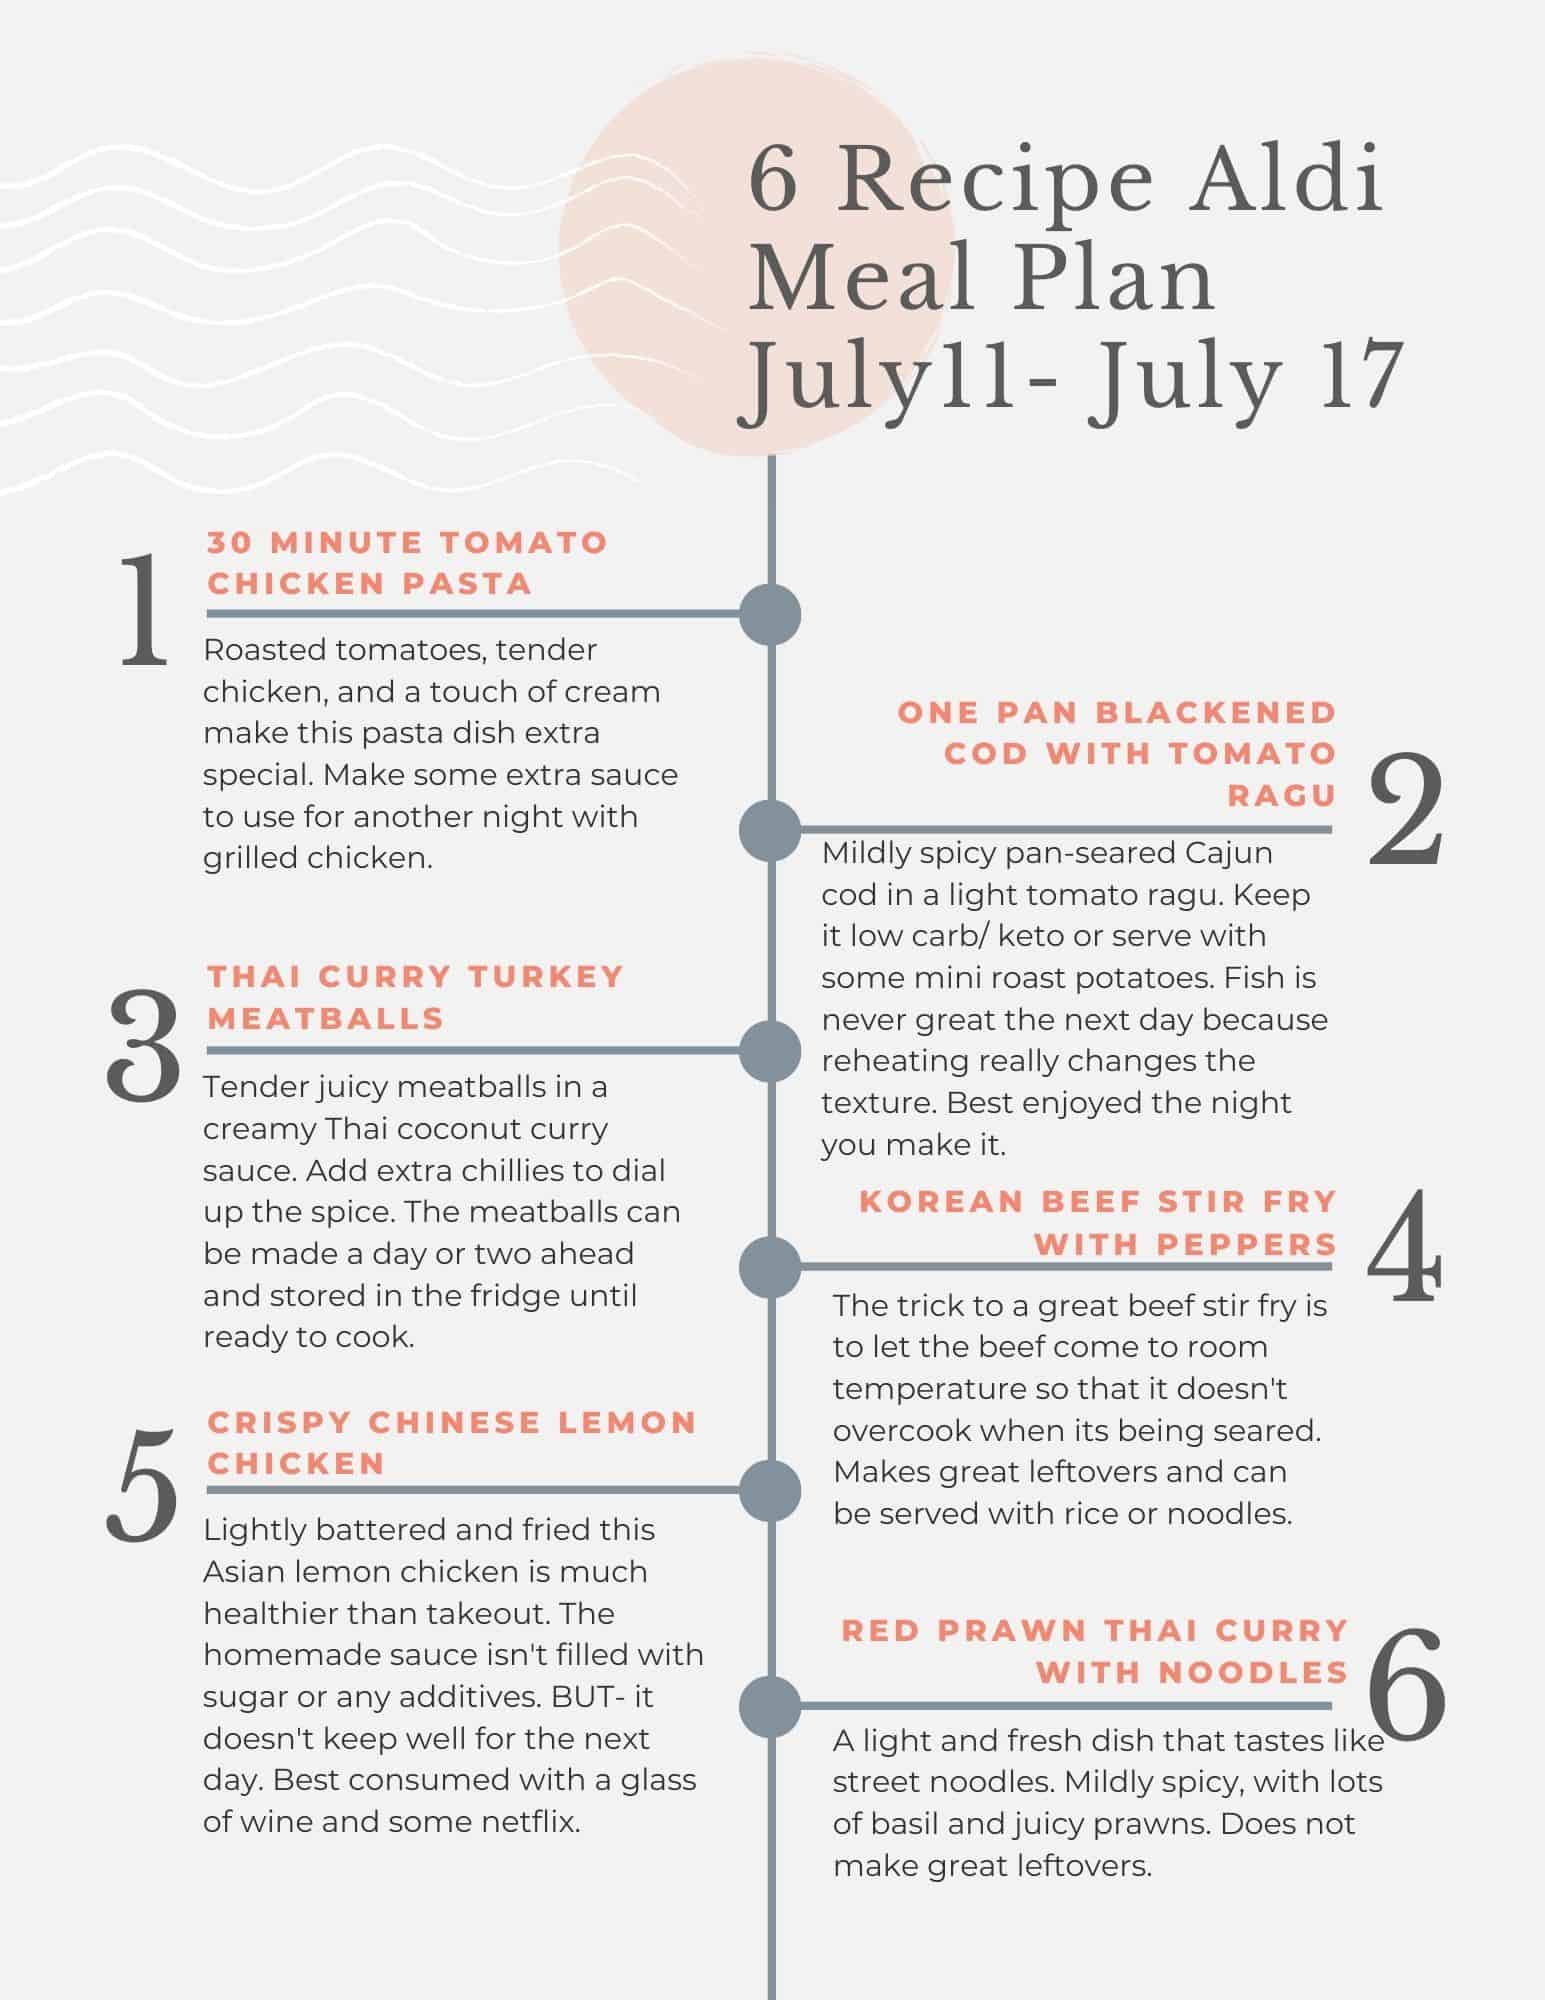 Budget meal plan with tips for and tricks for meal prep.